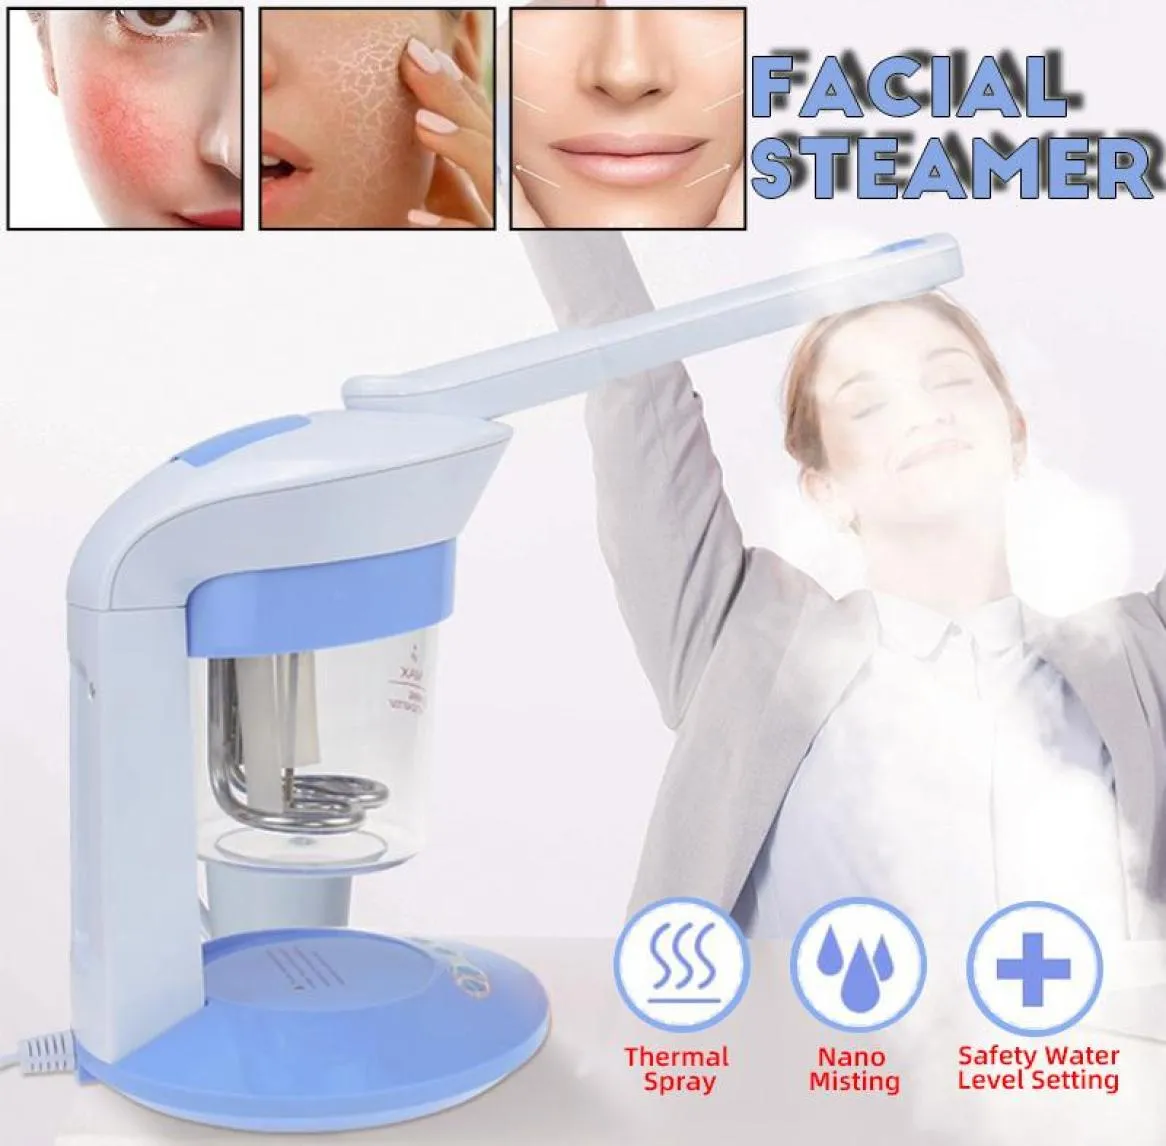 Deep Cleaning Facial Cleaner Beauty Face Steaming Device Facial Steamer Machine Facial Thermal Sprayer Skin Care Tool3841257